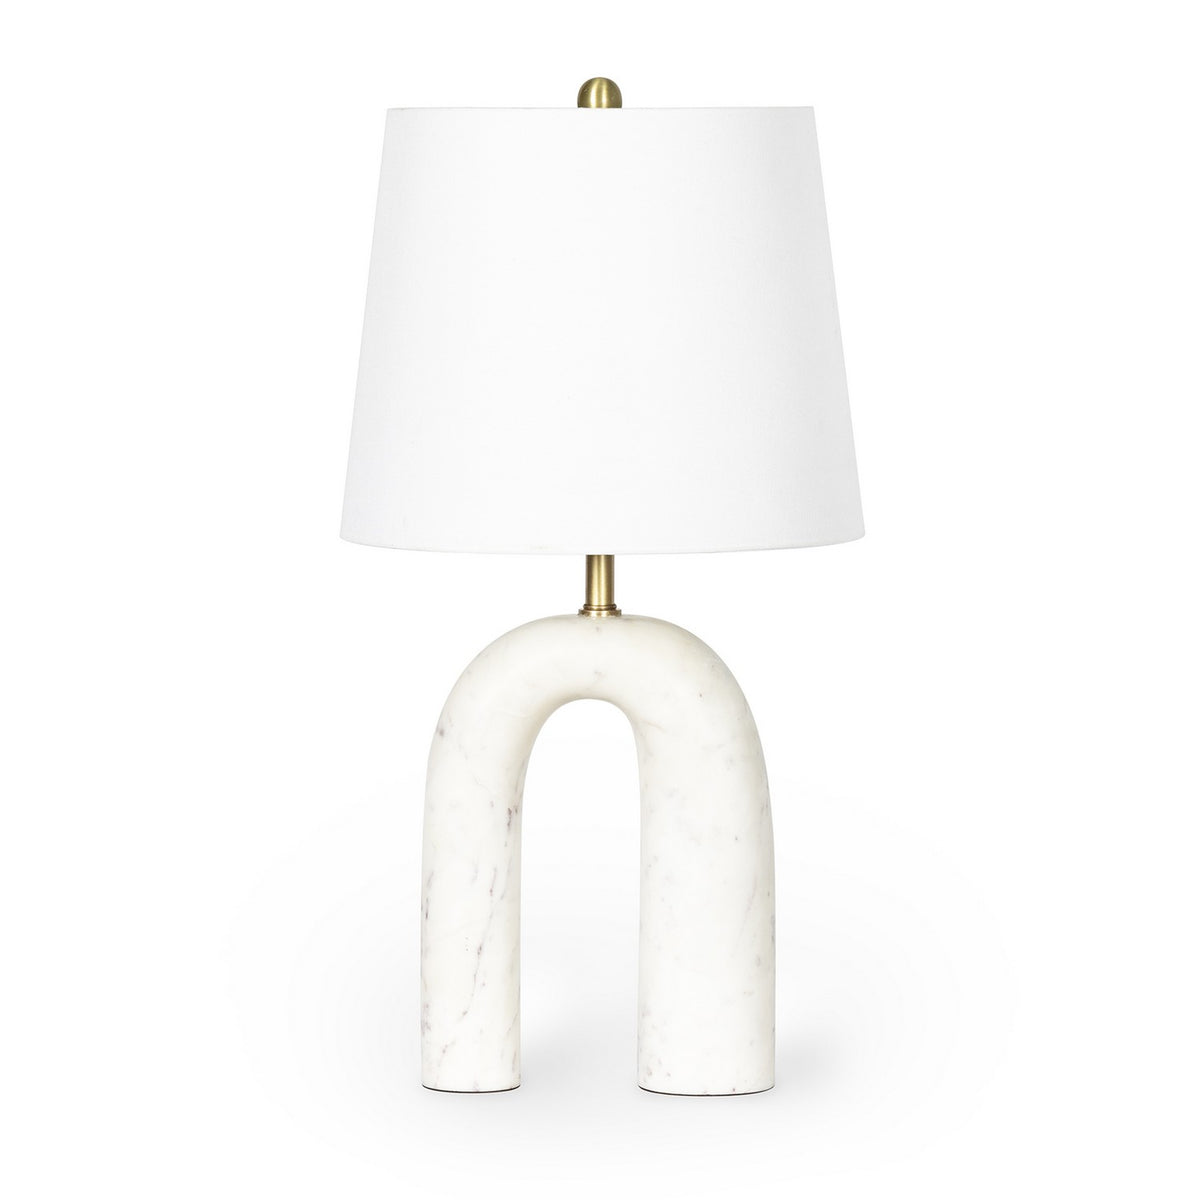 Regina Andrew One Light Table Lamp from the Slinkly collection in White finish